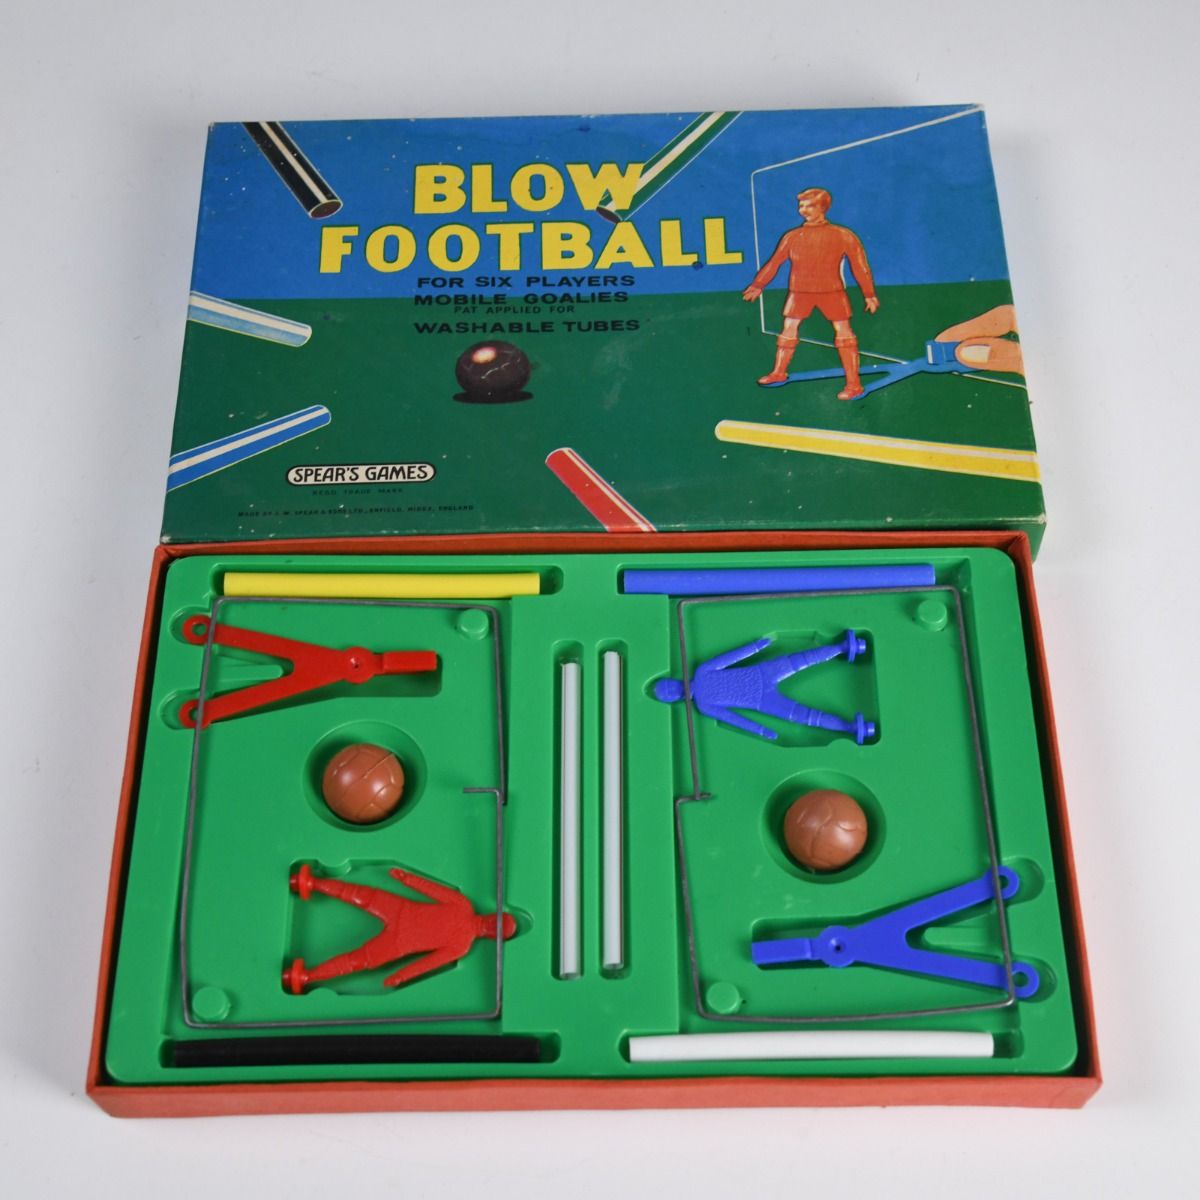 'Blow Football' 1960s Board Game